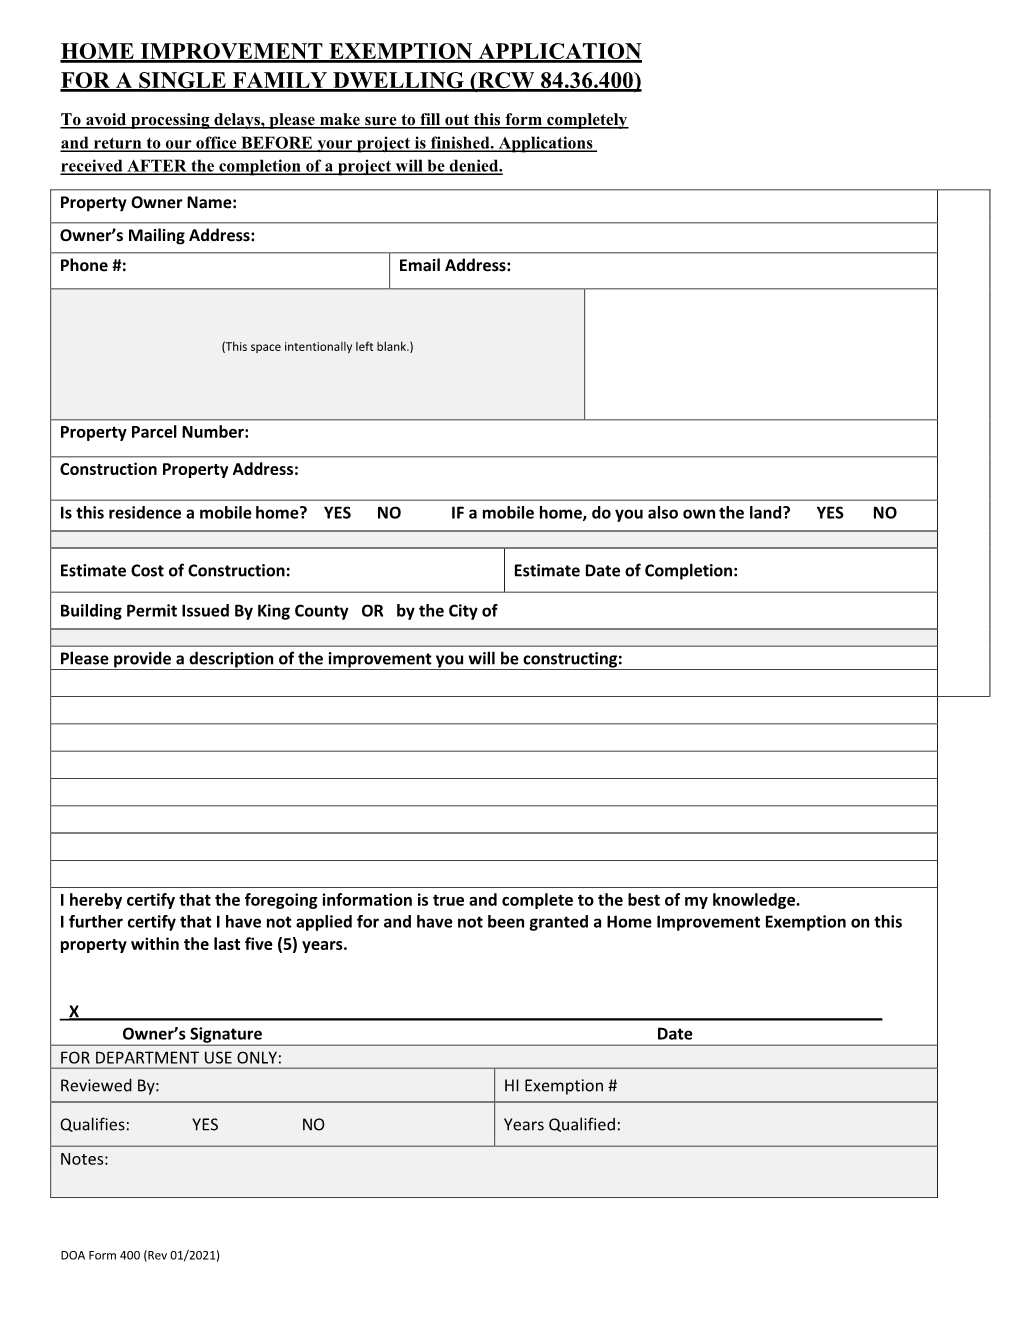 Home Improvement Exemption Application for a Single Family Dwelling (Rcw 84.36.400)